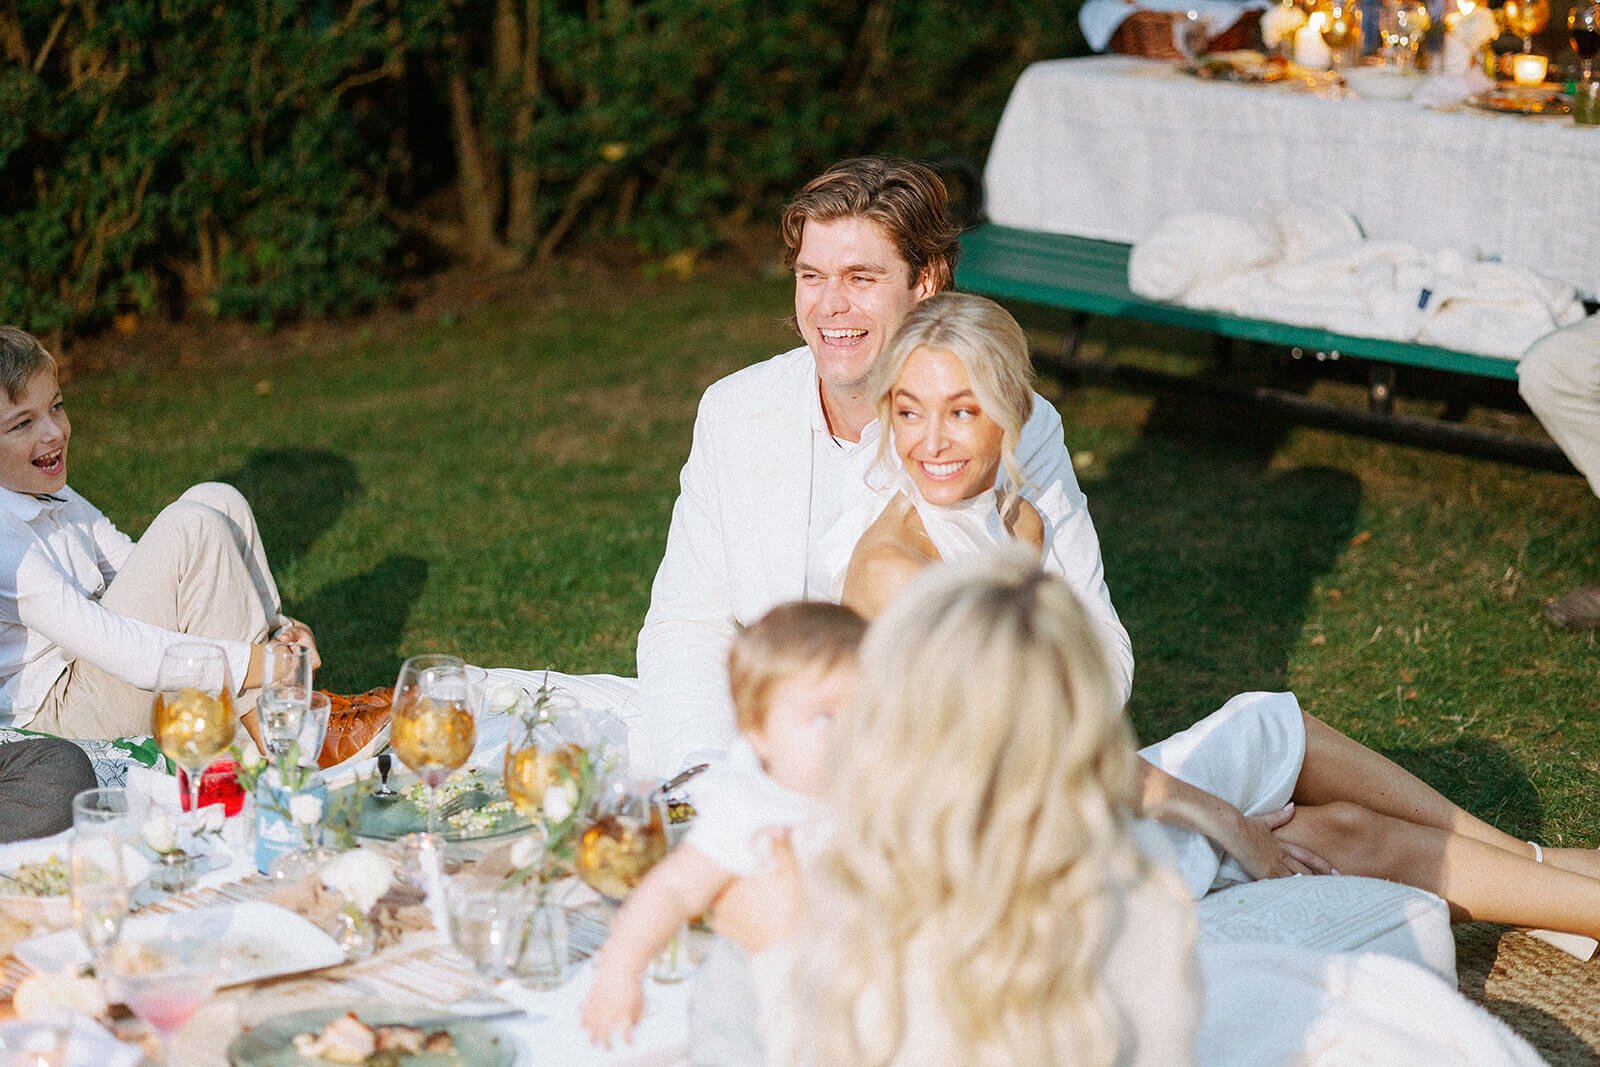 Intimate backyard wedding at a private home in Montauk, New York with picnic-style reception.